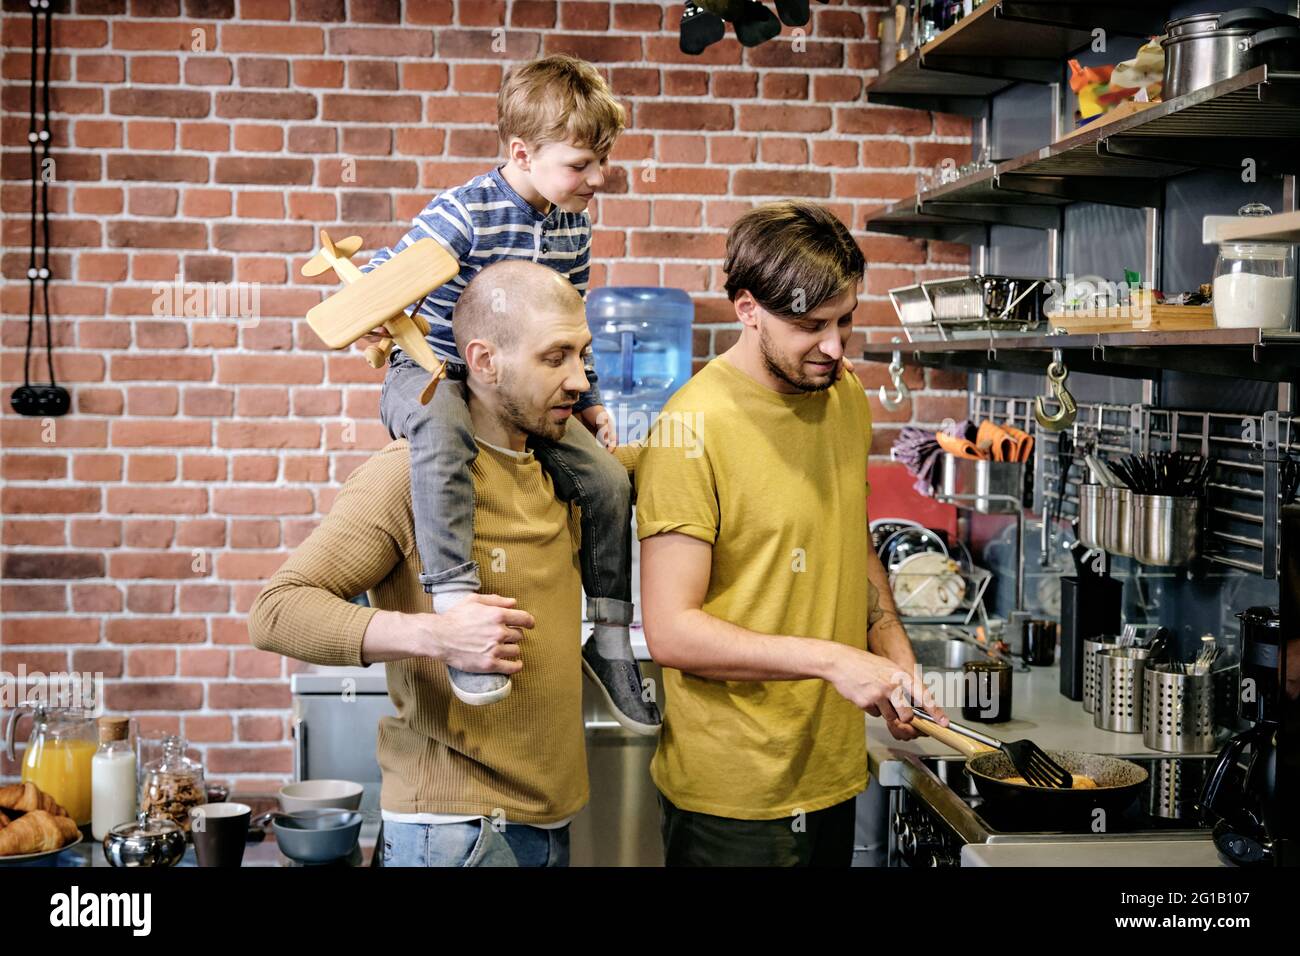 Two happy gay men and little boy cooking in kitchen environment Stock Photo